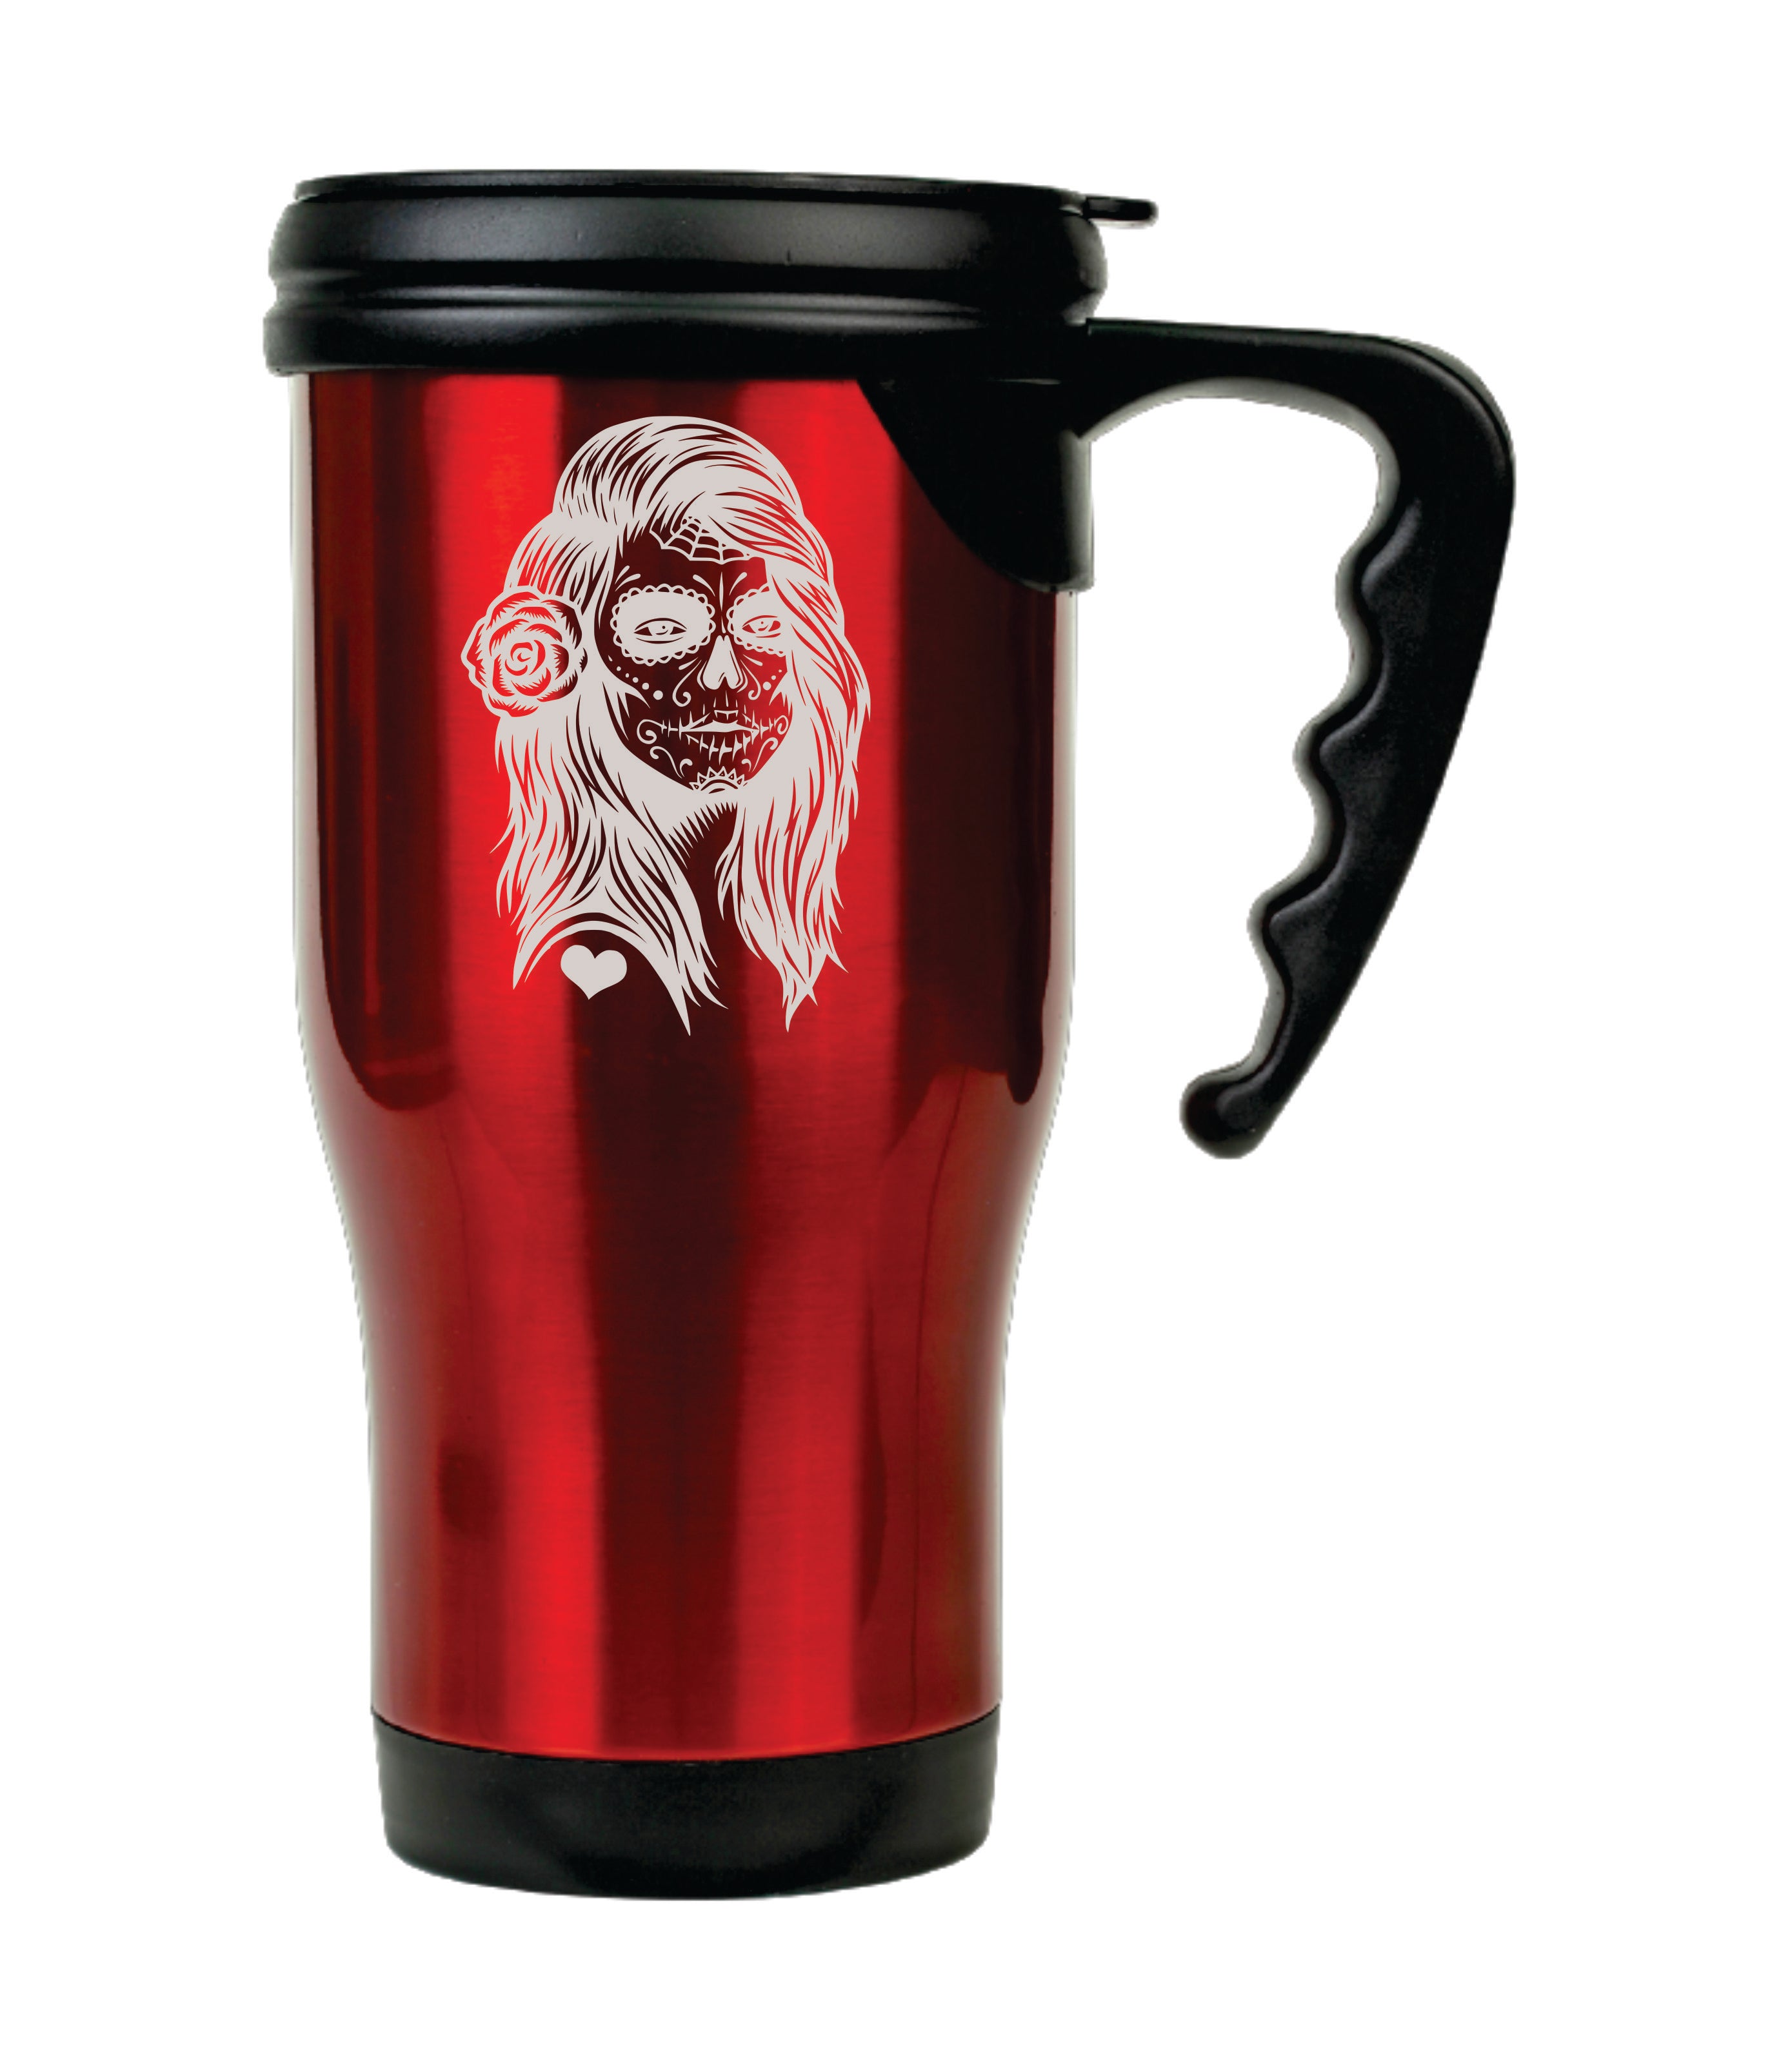 14 oz. Red Laserable Stainless Steel Travel Mug with Handle